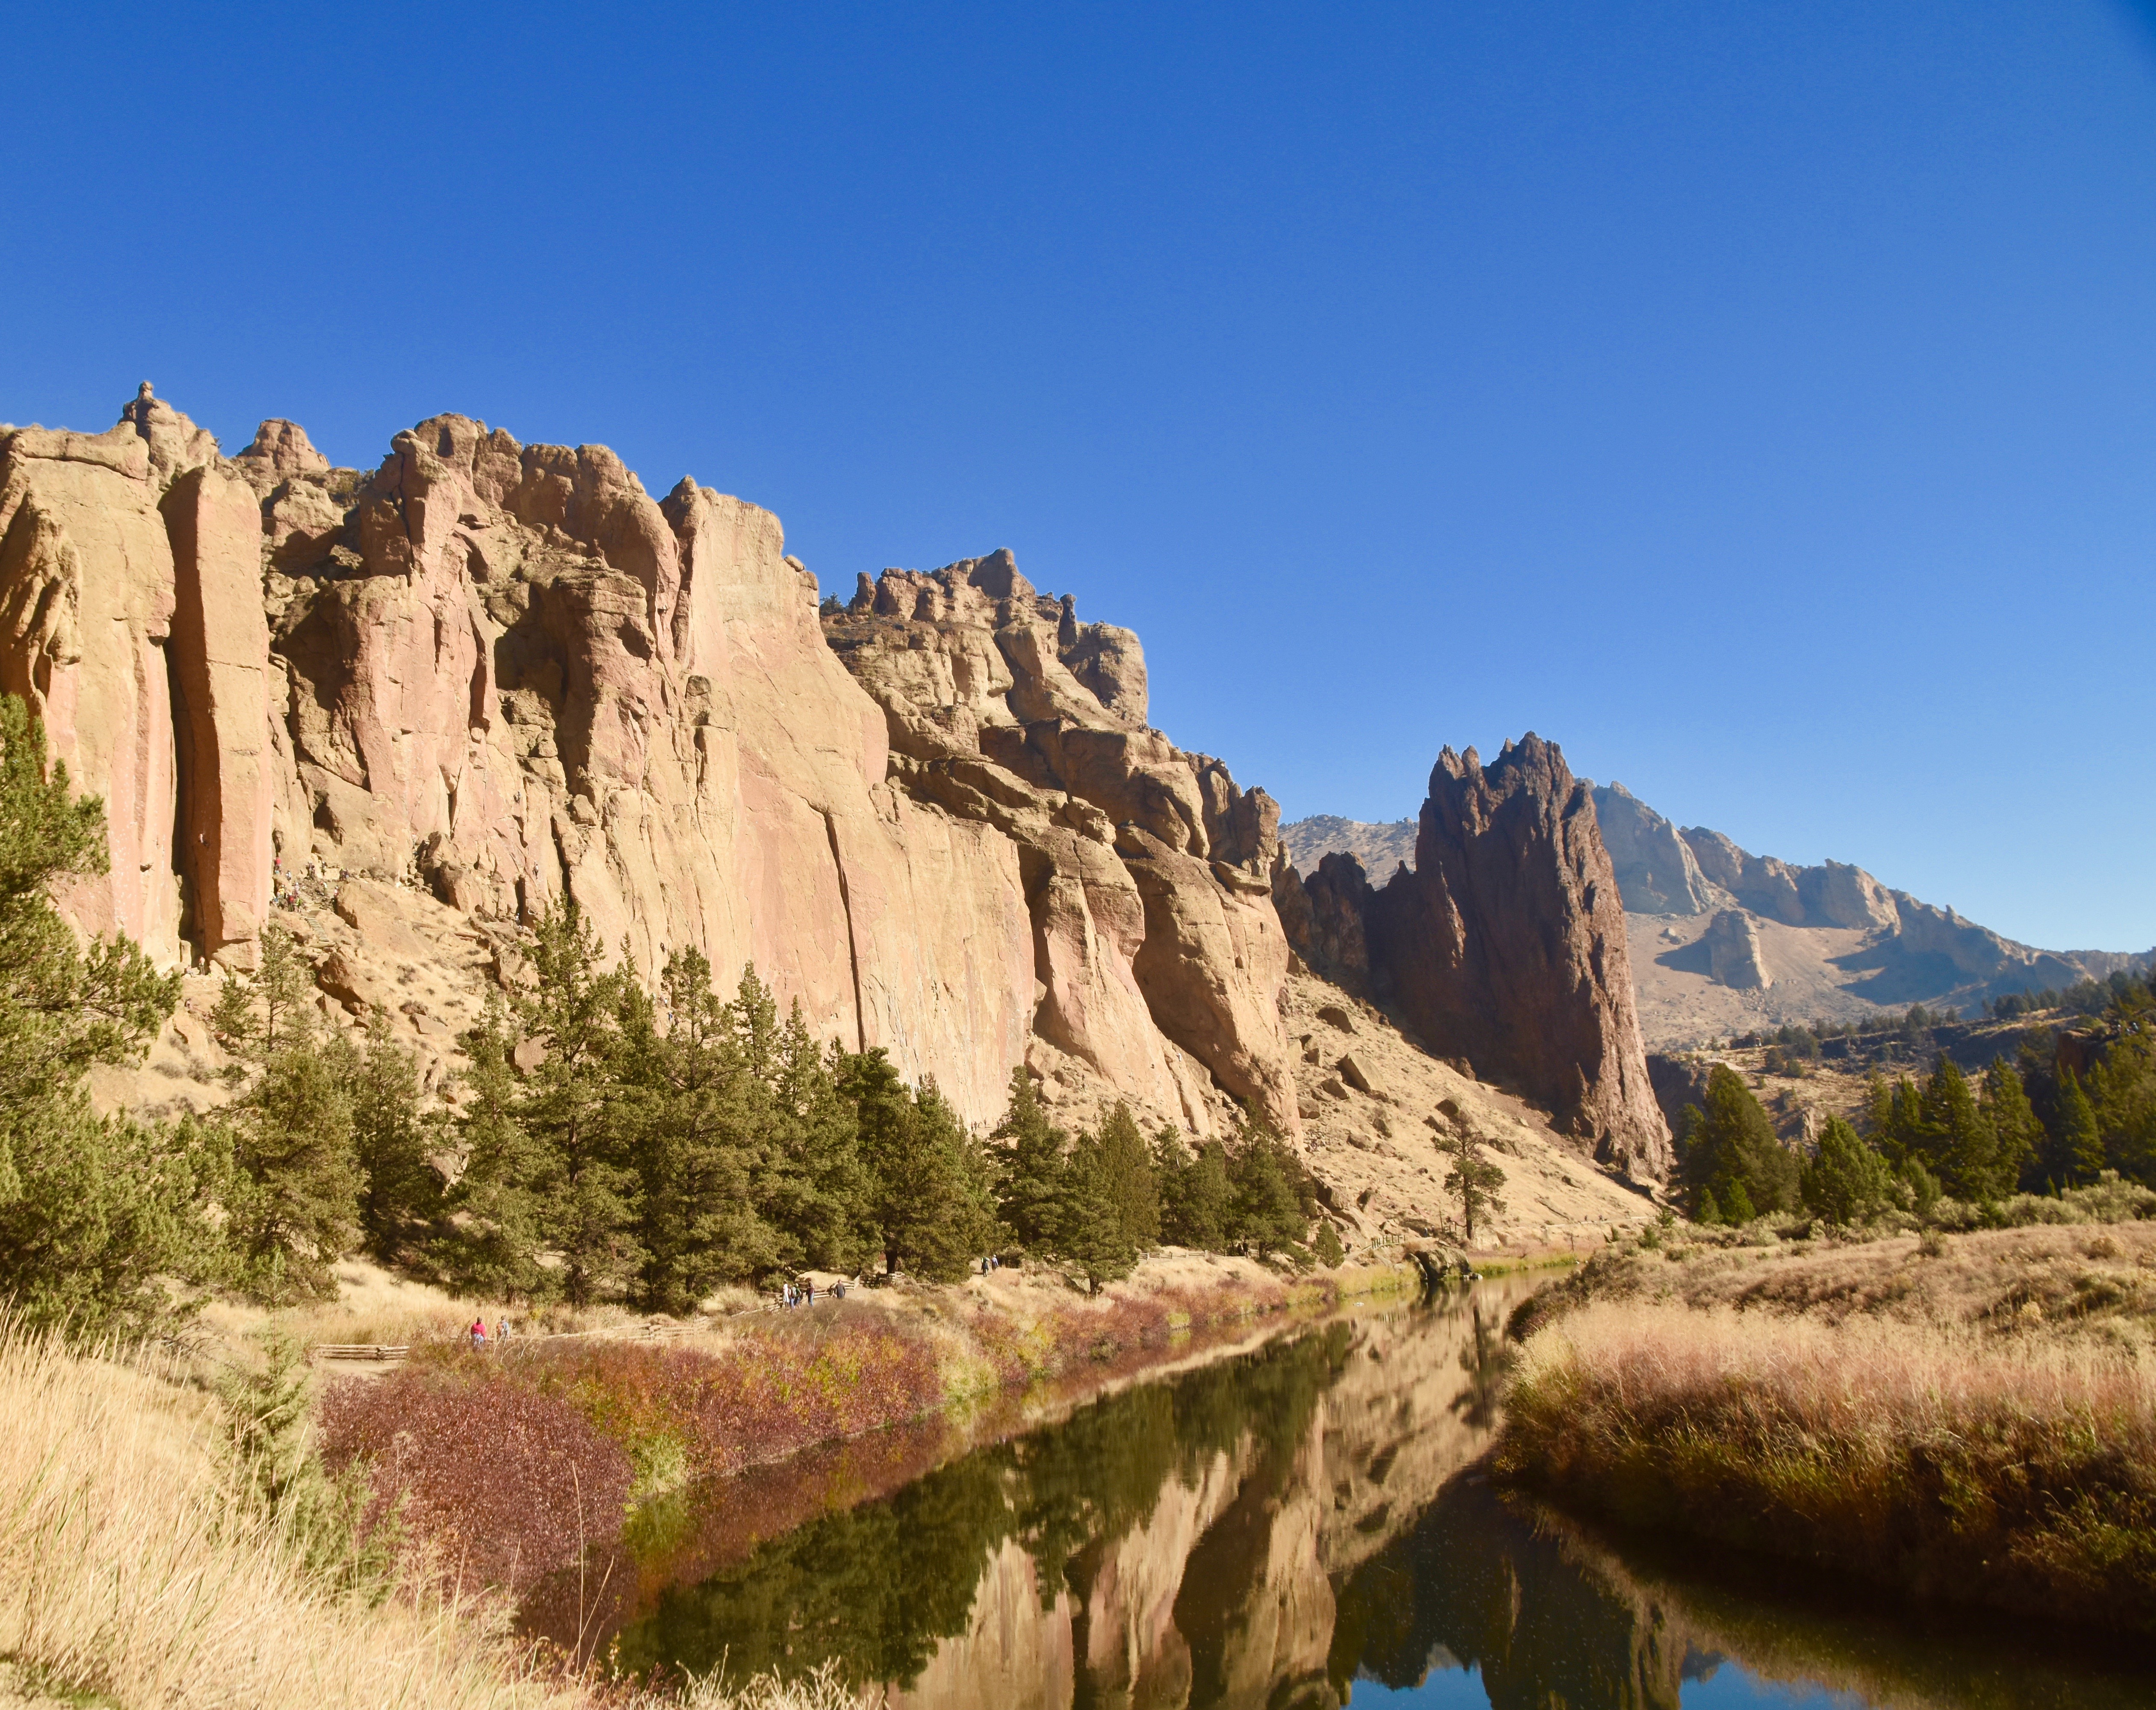 Crooked River Valley, Smith Rock State Park